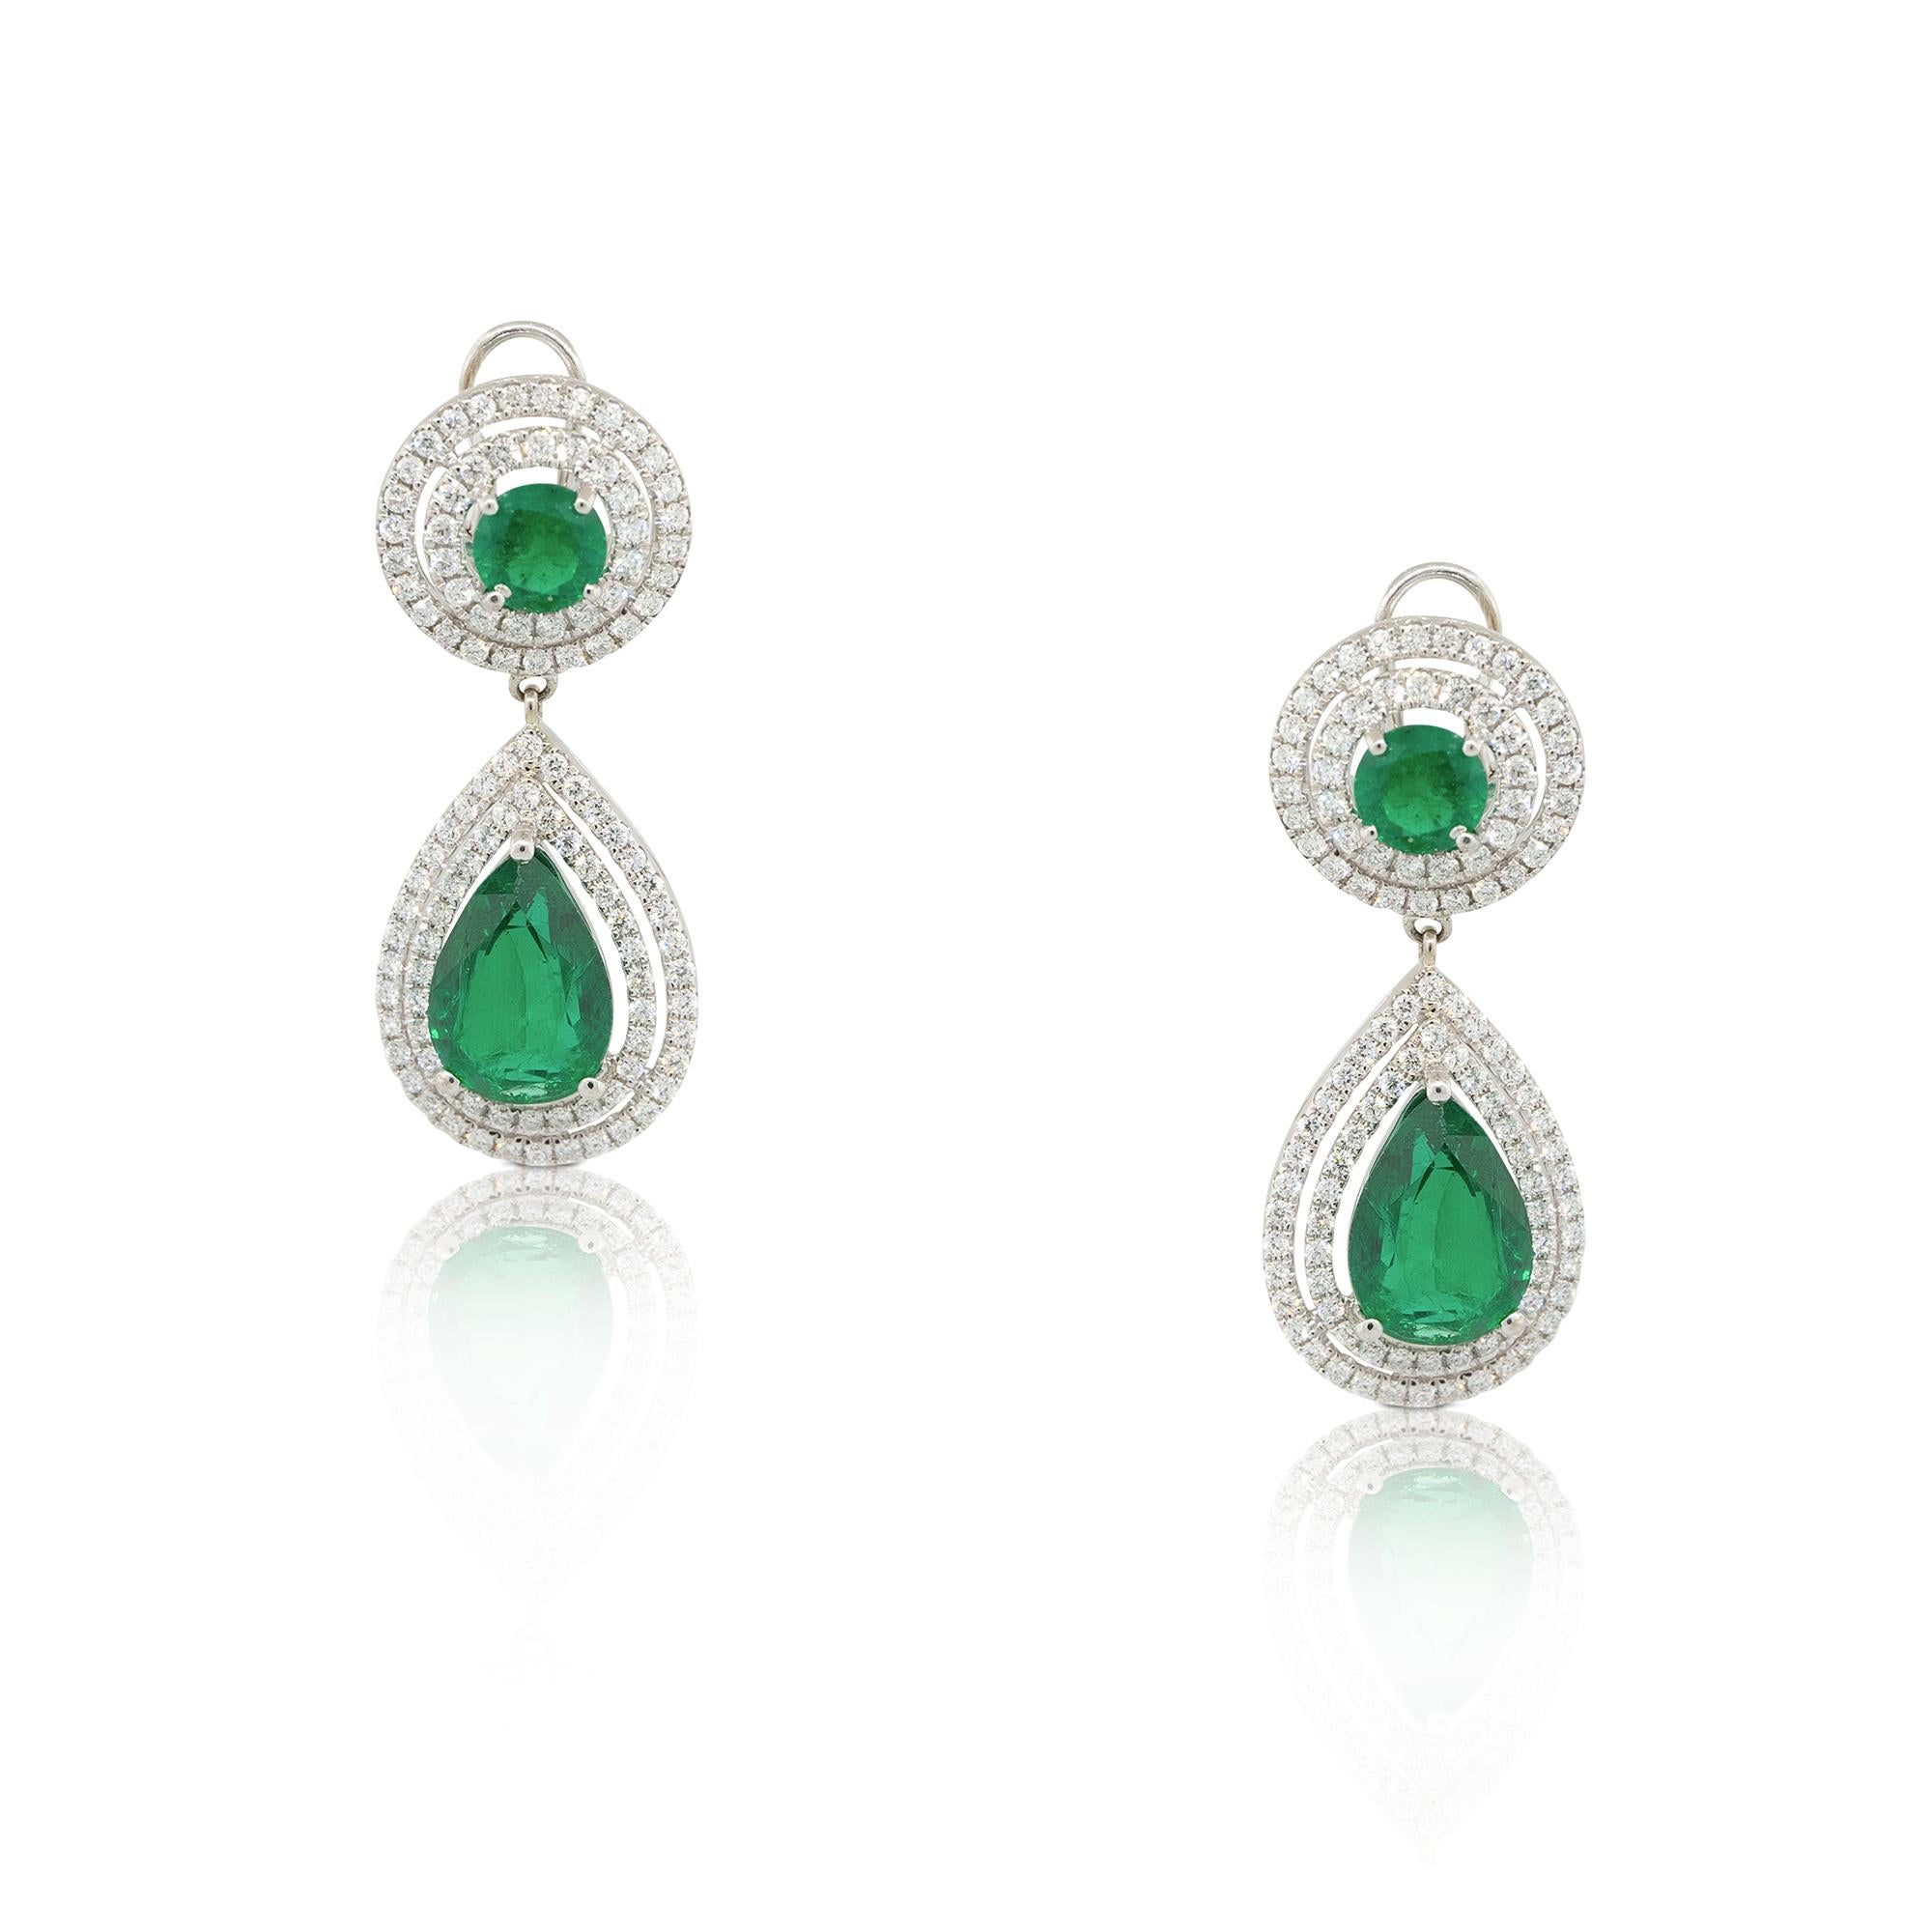 Material: 18k White Gold
Diamond/Stone Details: Approx. 6.04ctw of Round and Pear shaped Emeralds. Approx. 1.60ctw of Diamonds set in double halos. Diamonds are H/I in color and SI in clarity.
Total Weight: 3.4dwt 
Earring Backs: Omega